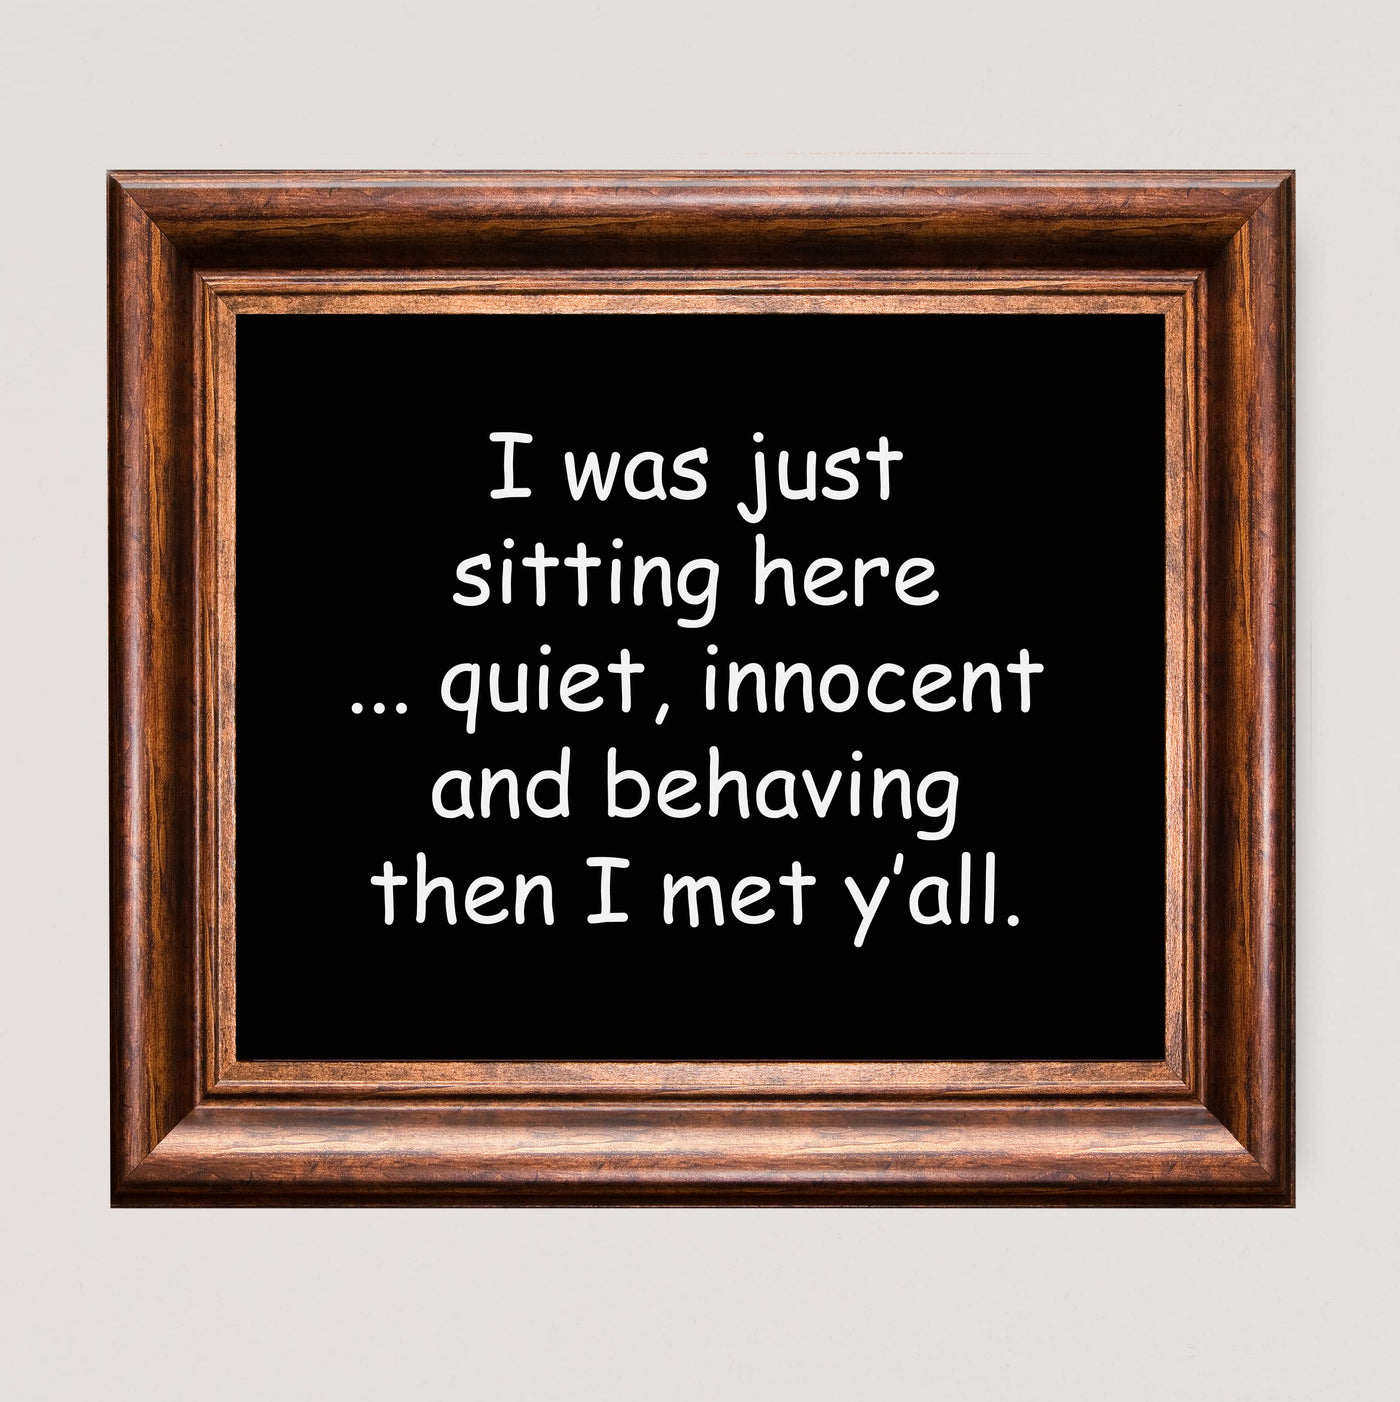 Was Sitting Here Quiet, Behaving-Then Met Y'All Funny Wall Decor Sign -10 x 8" Black & White Sarcastic Art Print -Ready to Frame. Humorous Home-Office-Bar-Shop-Man Cave Decor. Fun Novelty Gift!